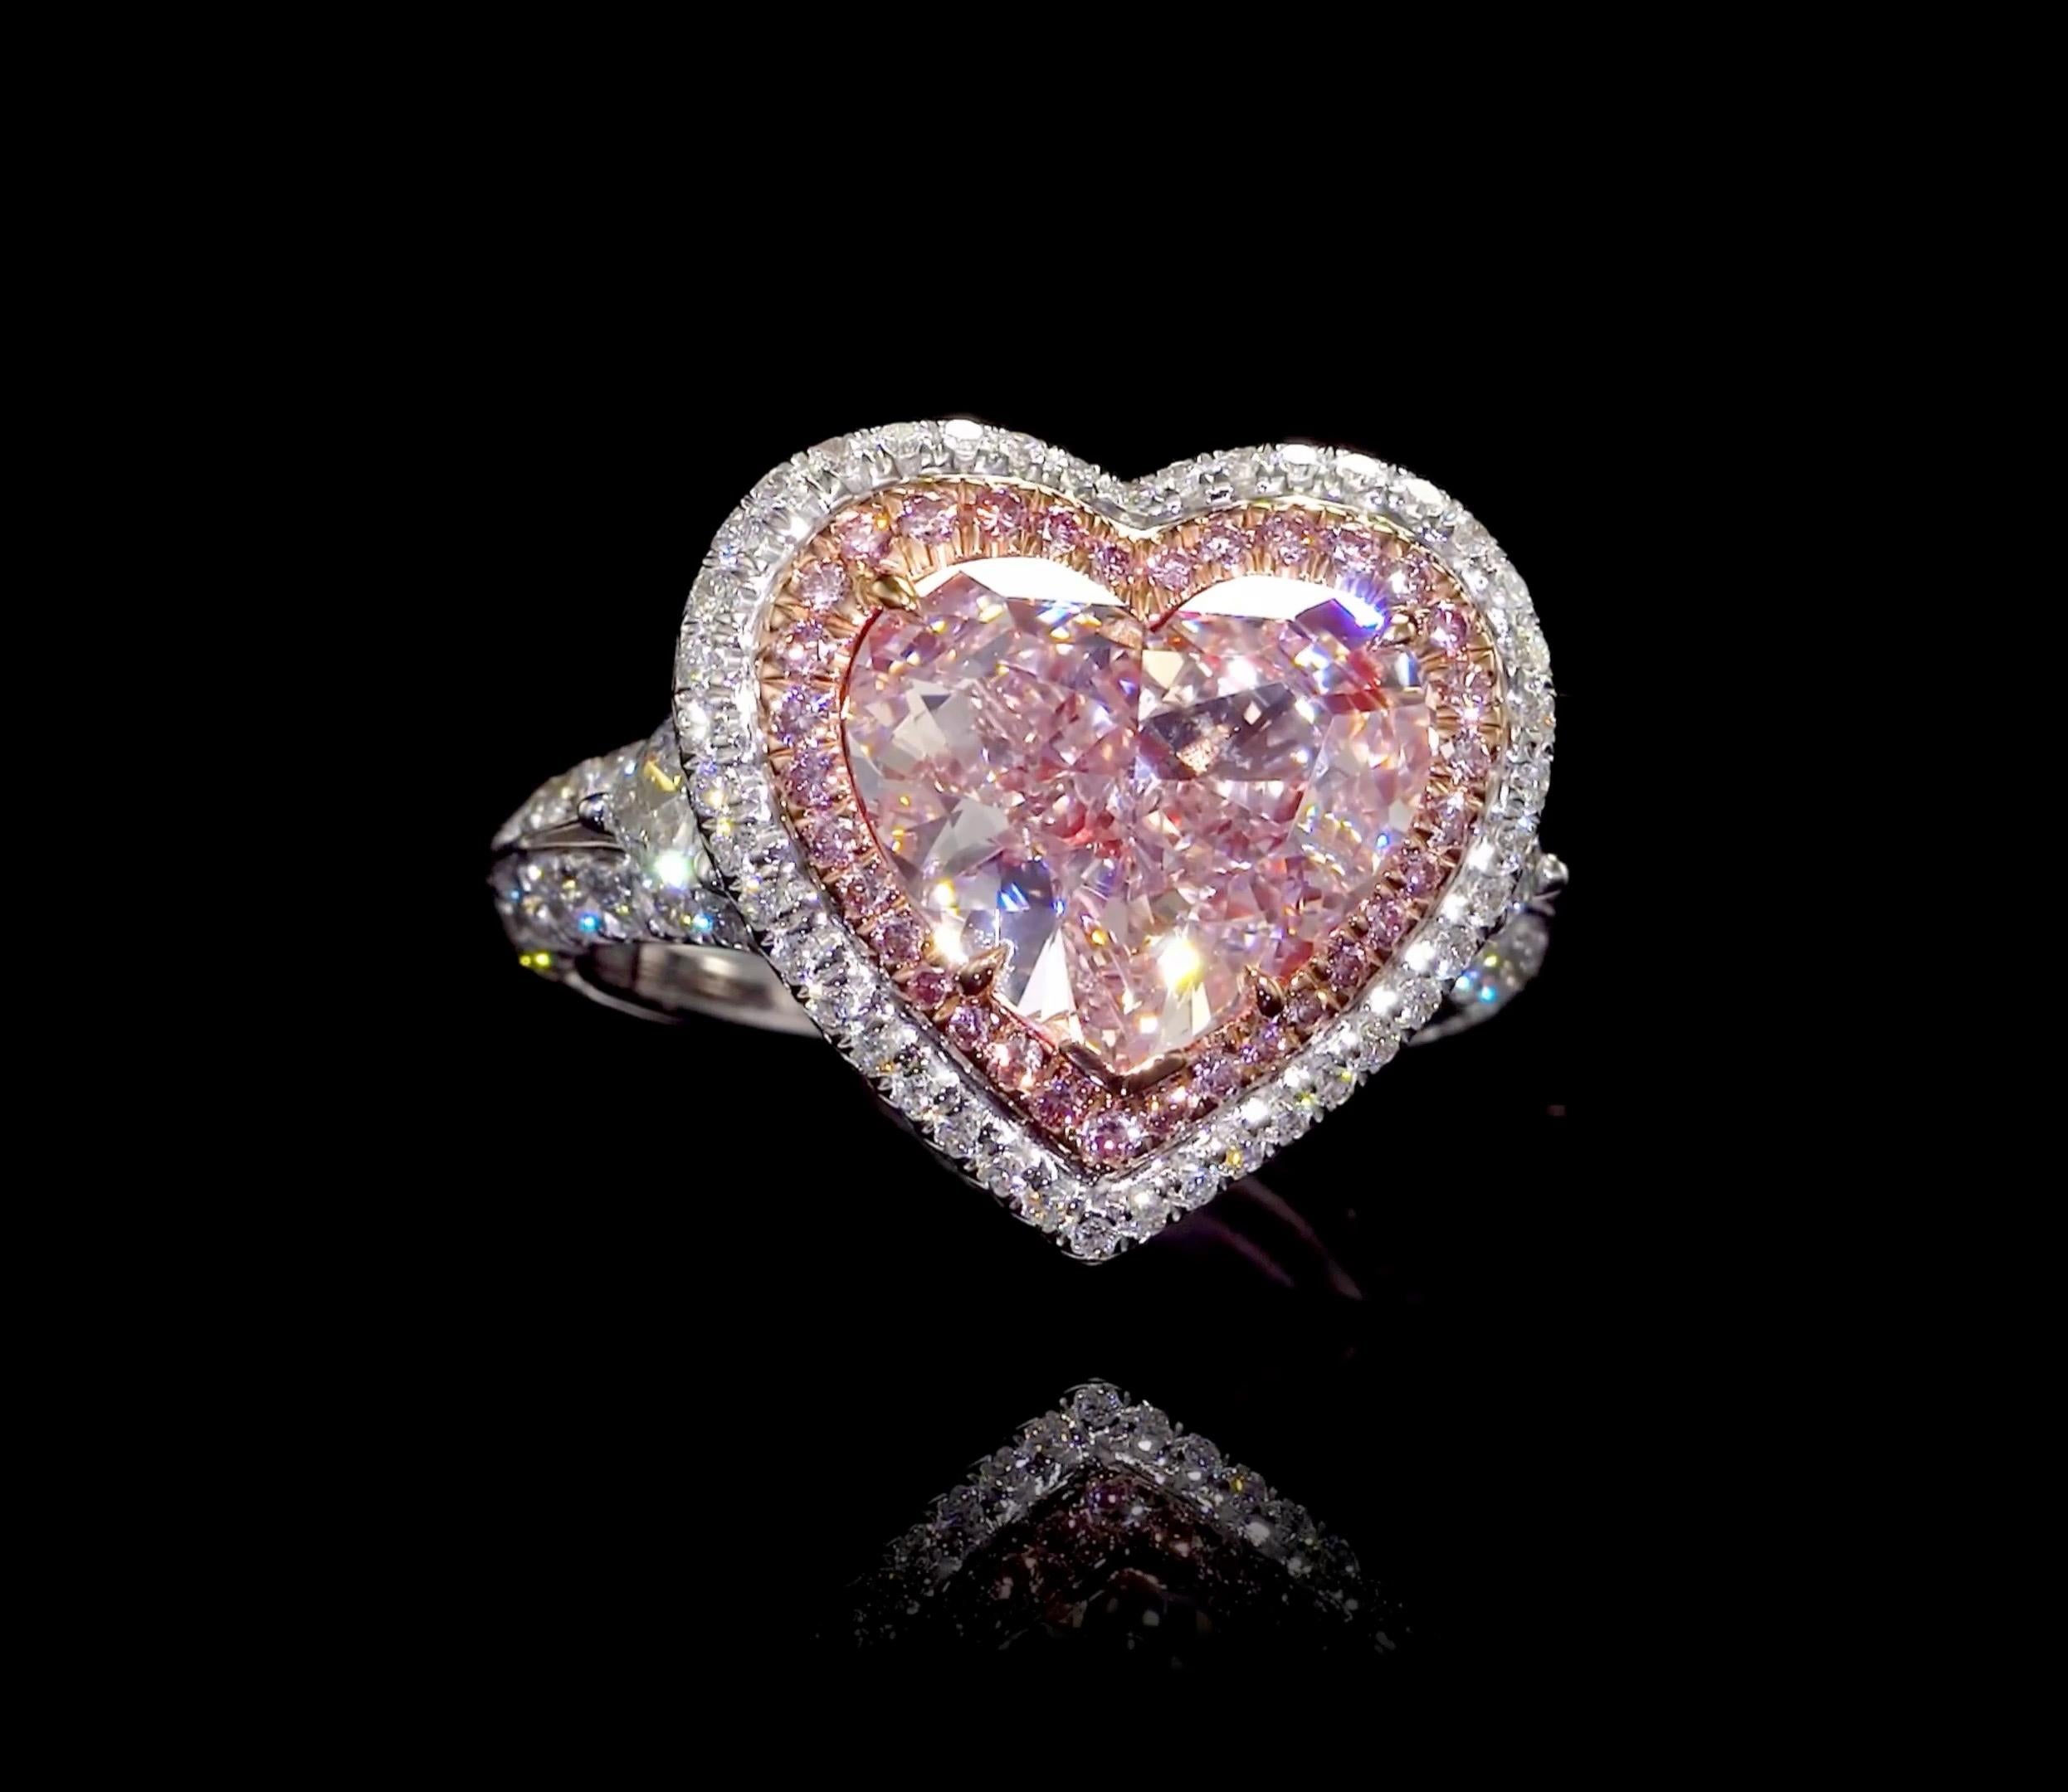 Women's or Men's Emilio Jewelry Gia Certified 4.50 Carat Internally Flawless Pink Diamond Ring For Sale